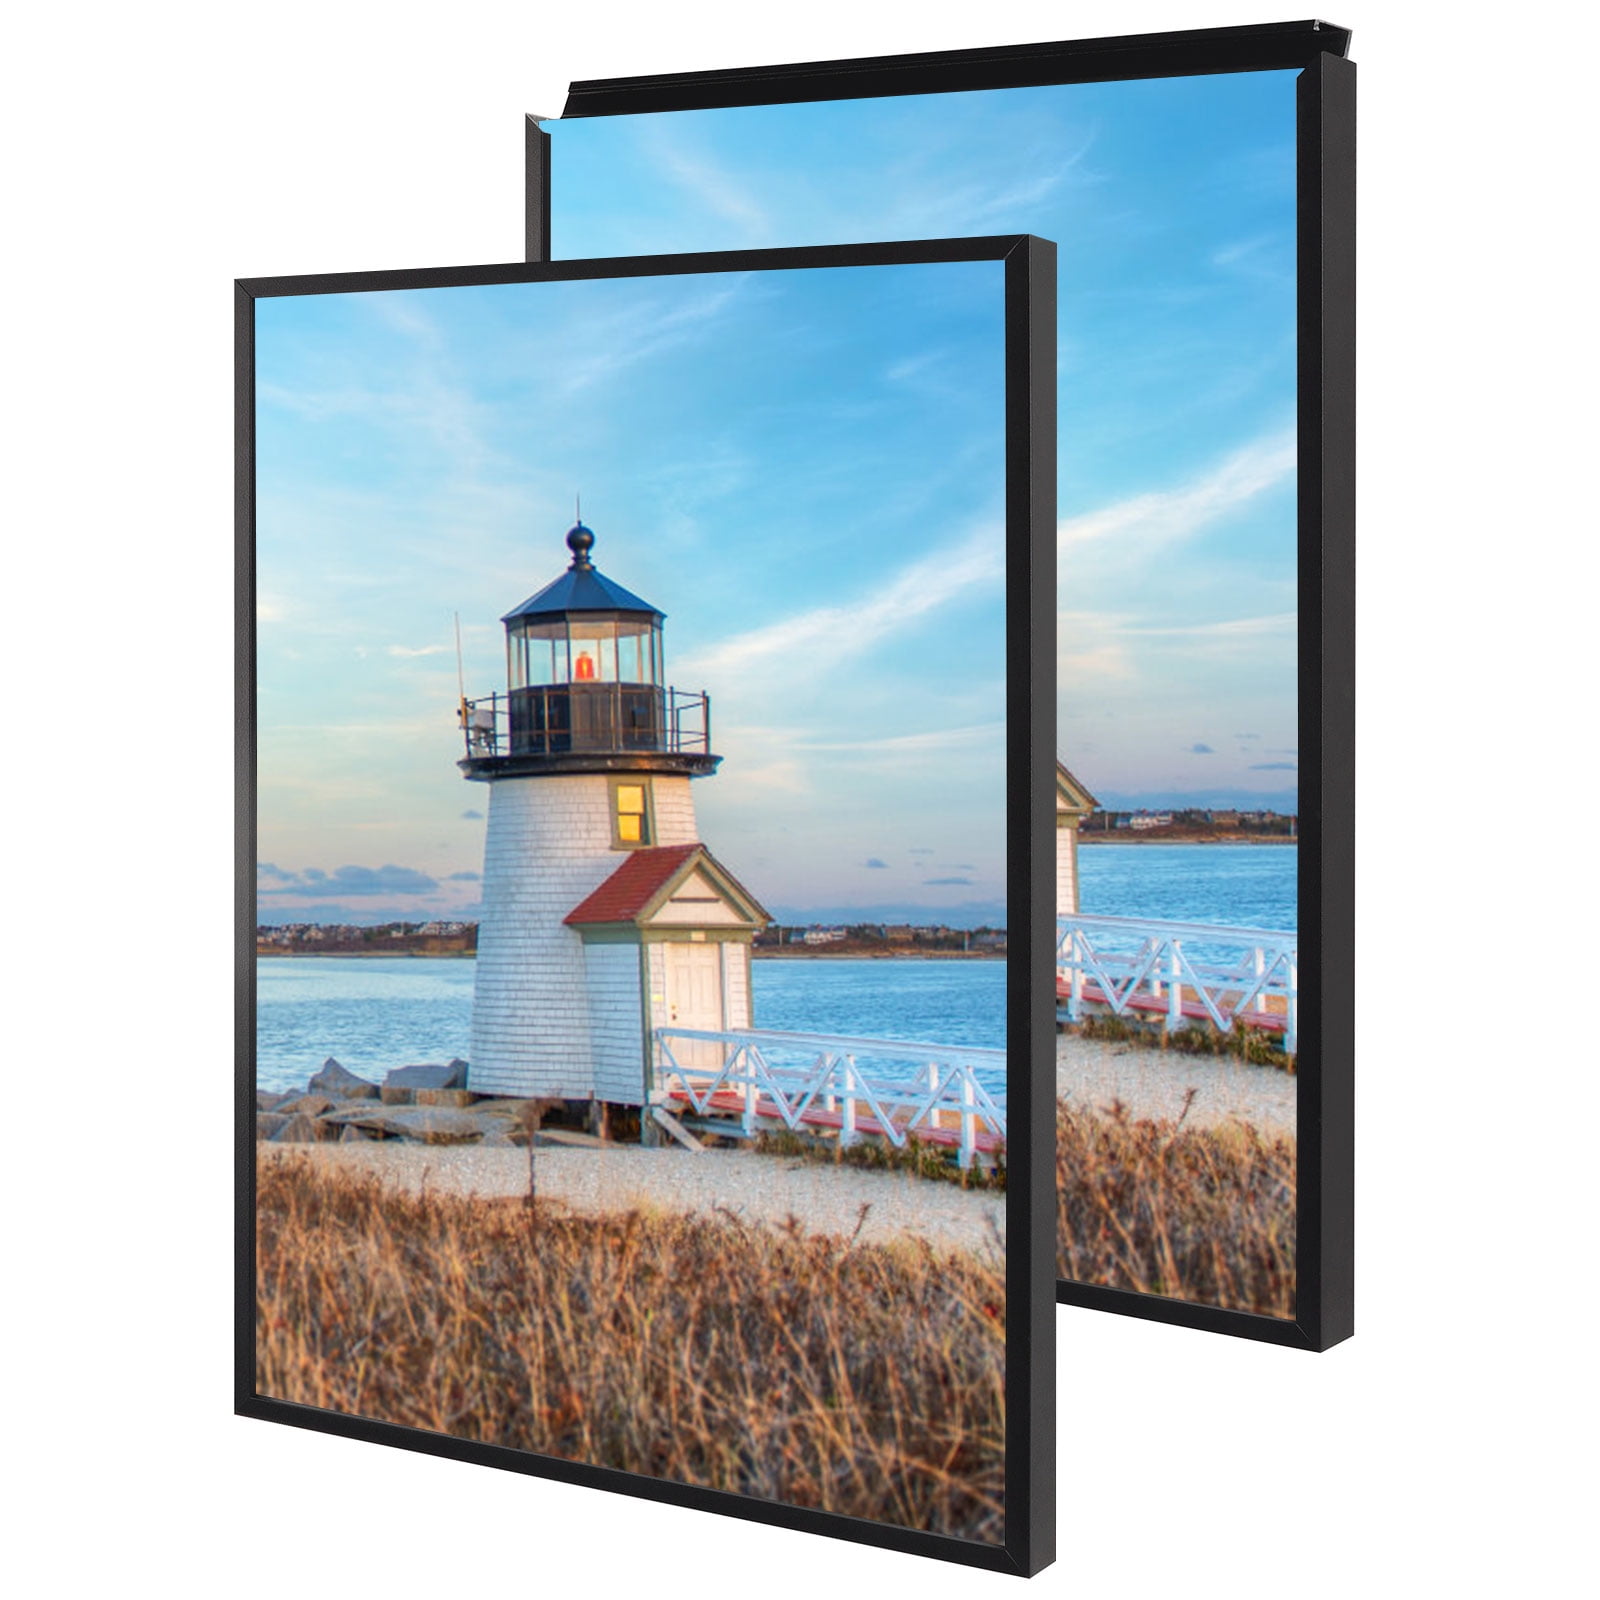 Podronale 24x36 Canvas Frame3/4 inch Floater Frame for 0.6 inch-0.9 inch Depth Canvas Painting (Black), Size: 24 x 36